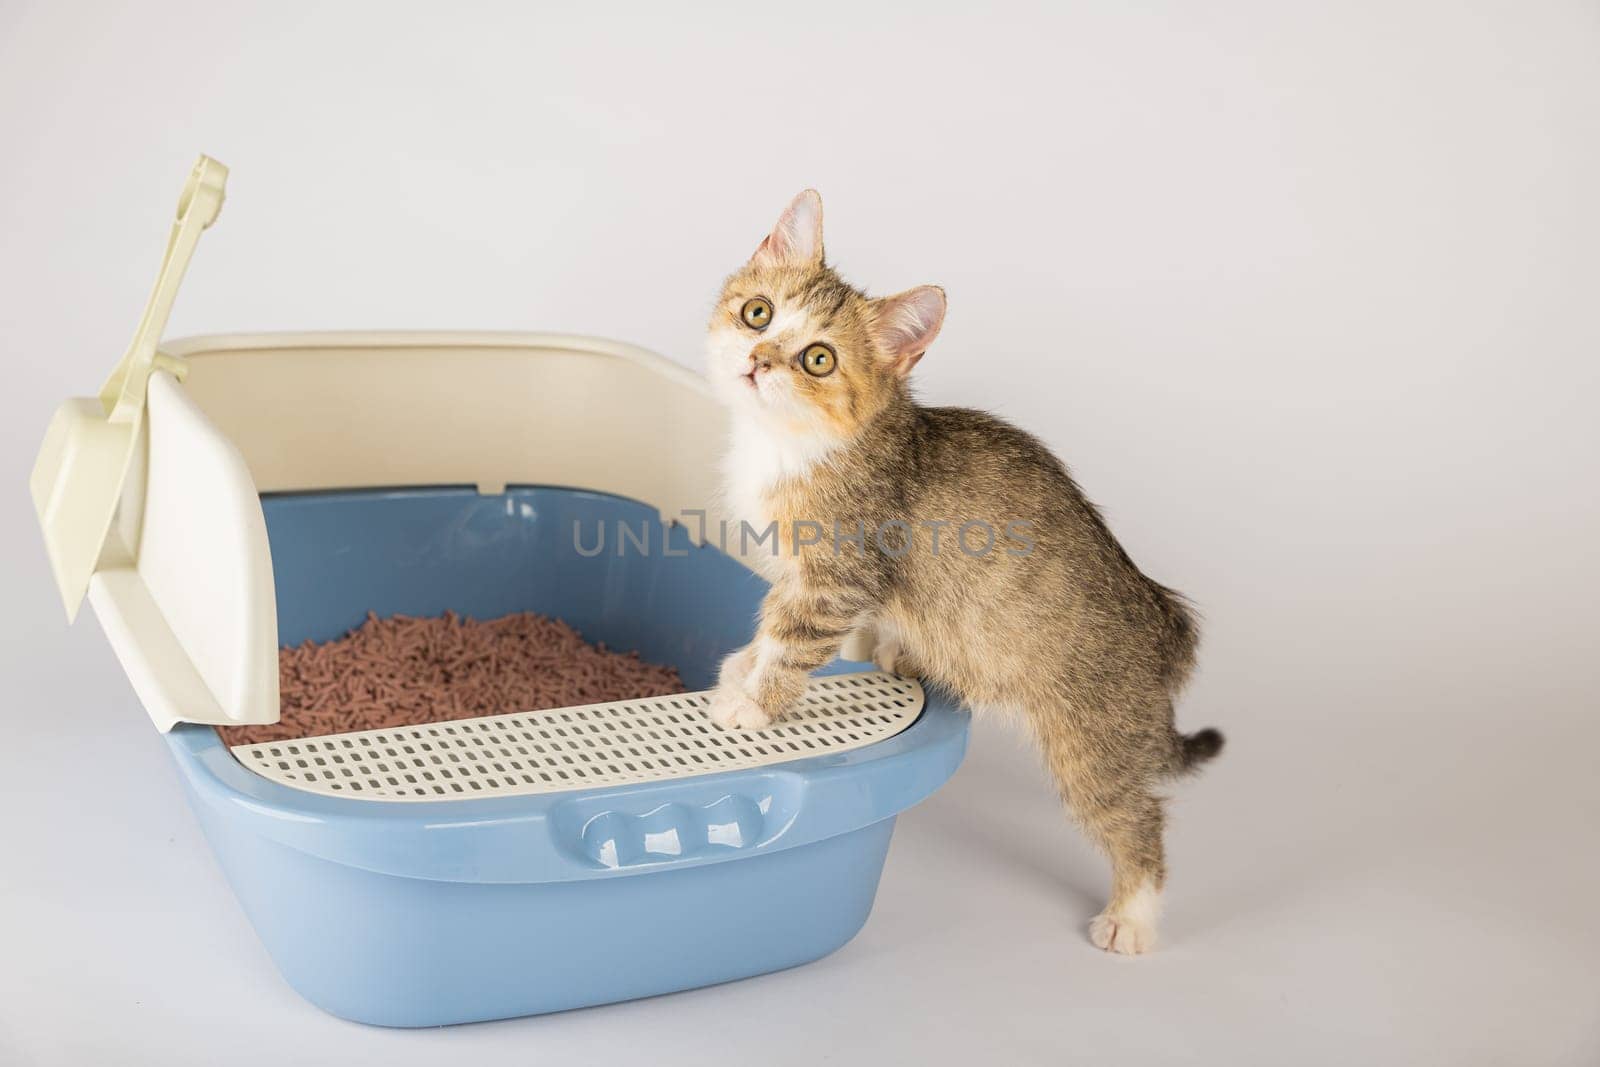 A cat comfortably sits in a litter box on a pristine white background emphasizing the need for animal care and hygiene. The cat tray is where the cat conducts its business. by Sorapop